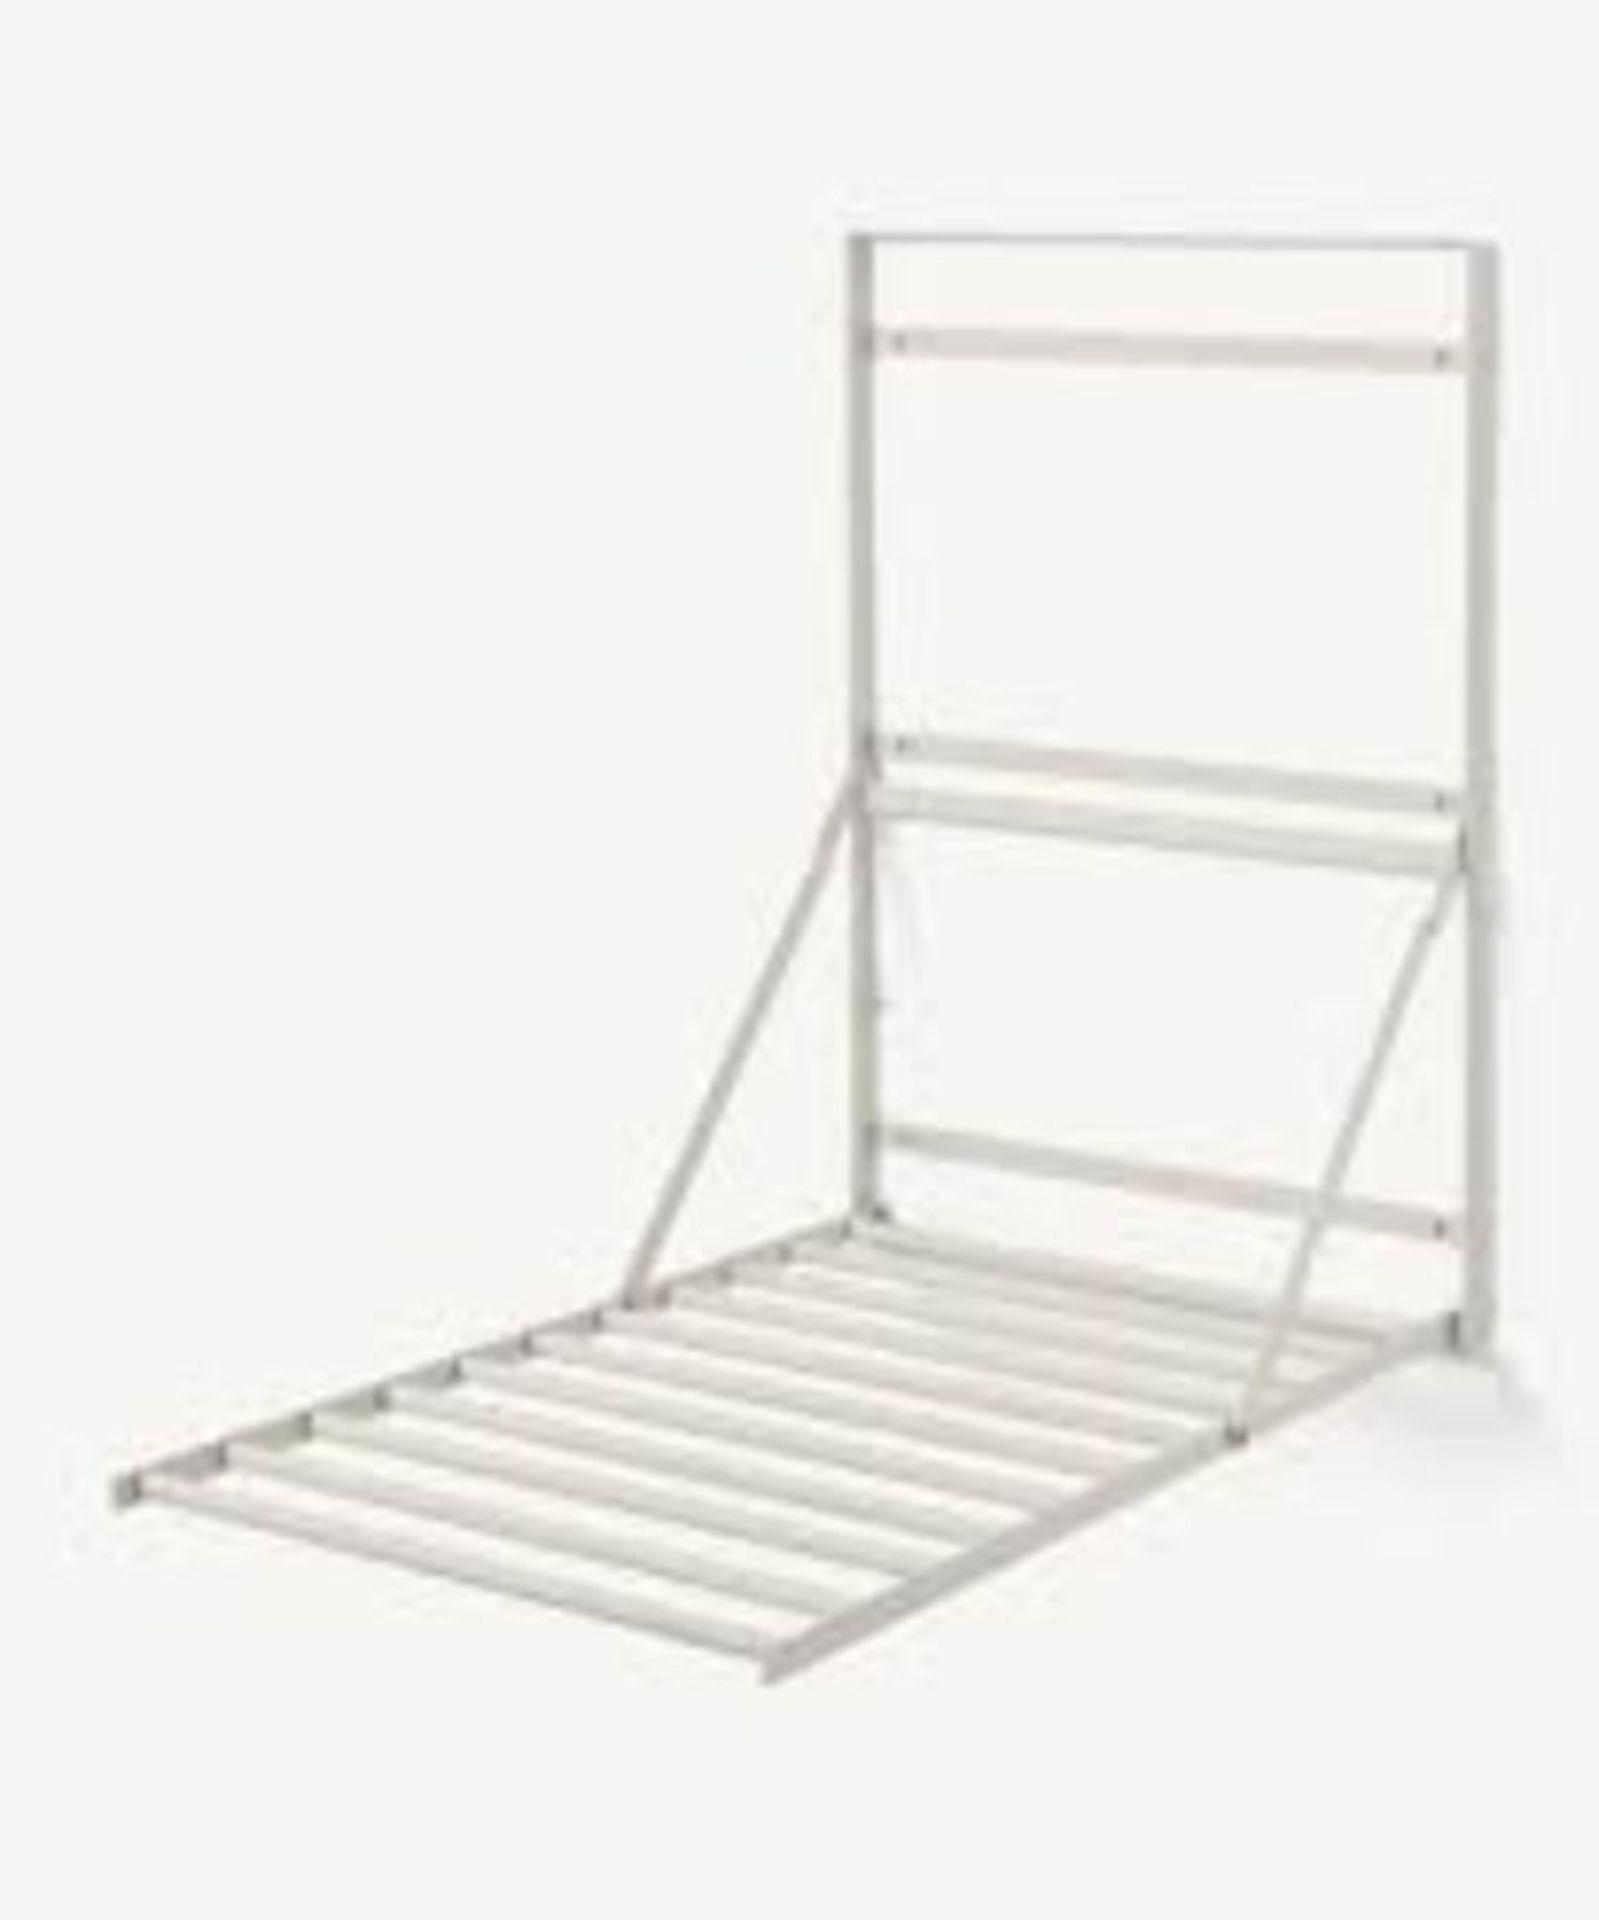 1 x Made.com Lucia Wall-Mounted Clothes Airer Warm Grey RRP £59 SKU MAD-UTYLUC003GRY-UK TOTAL RRP £